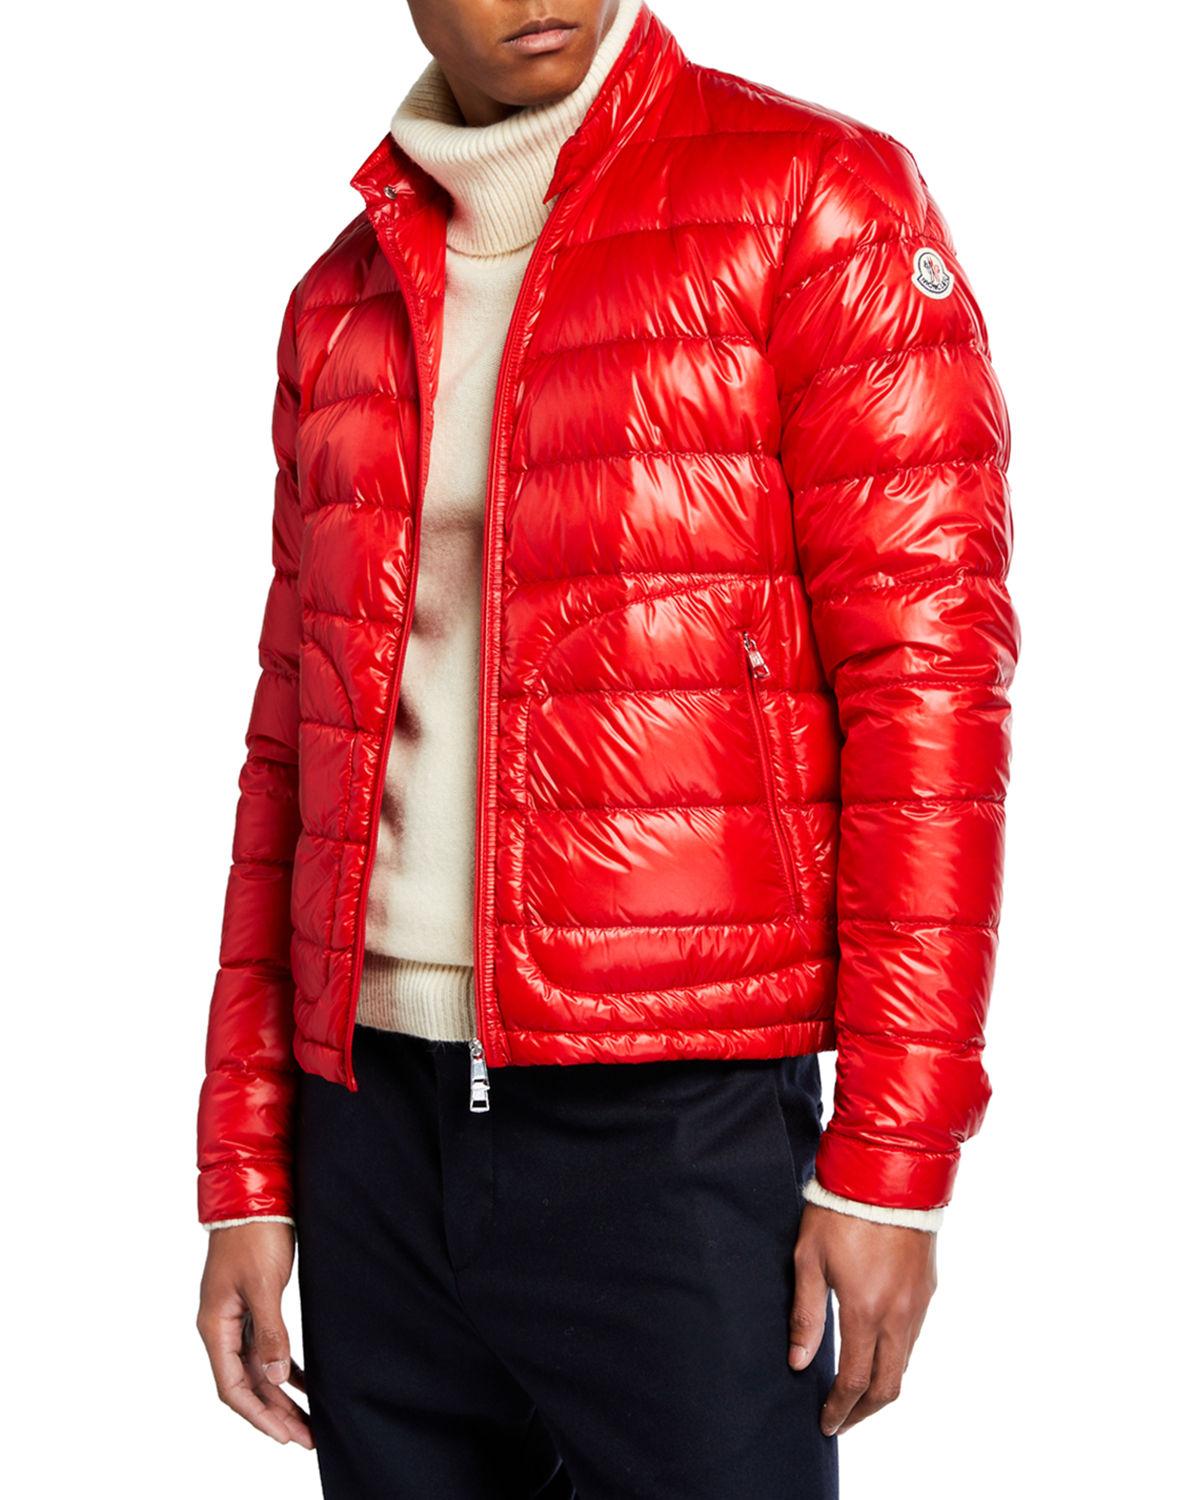 Lyst - Moncler Men's Acorus Quilted Stretch Down Jacket in Red for Men